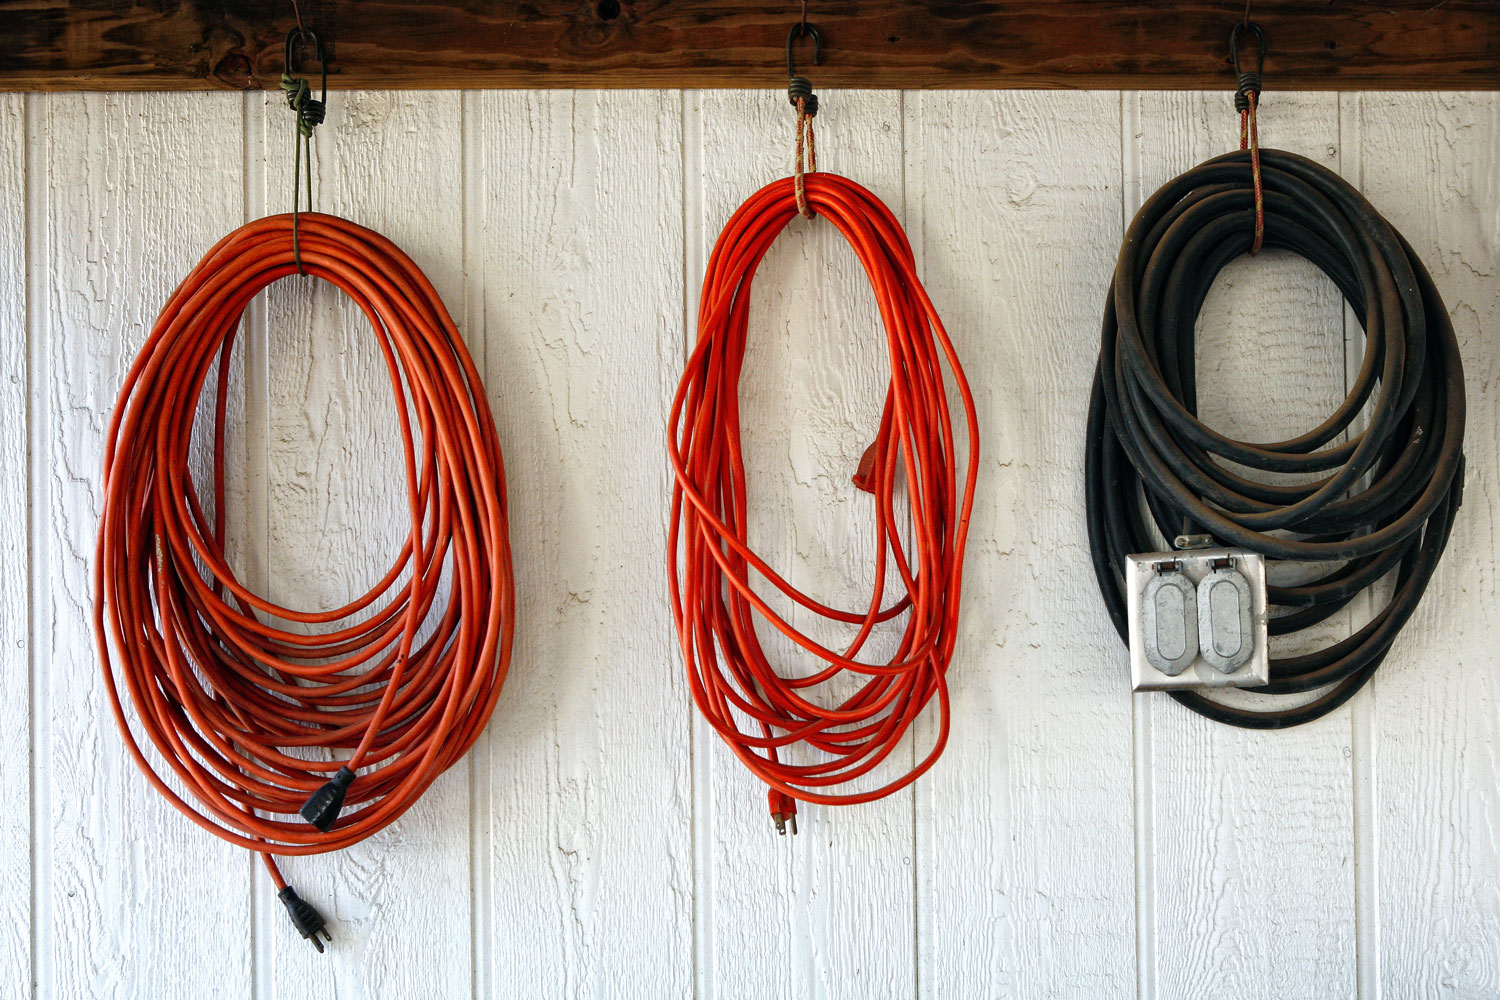 Different lengths and colors of extension cord hanged on the wall